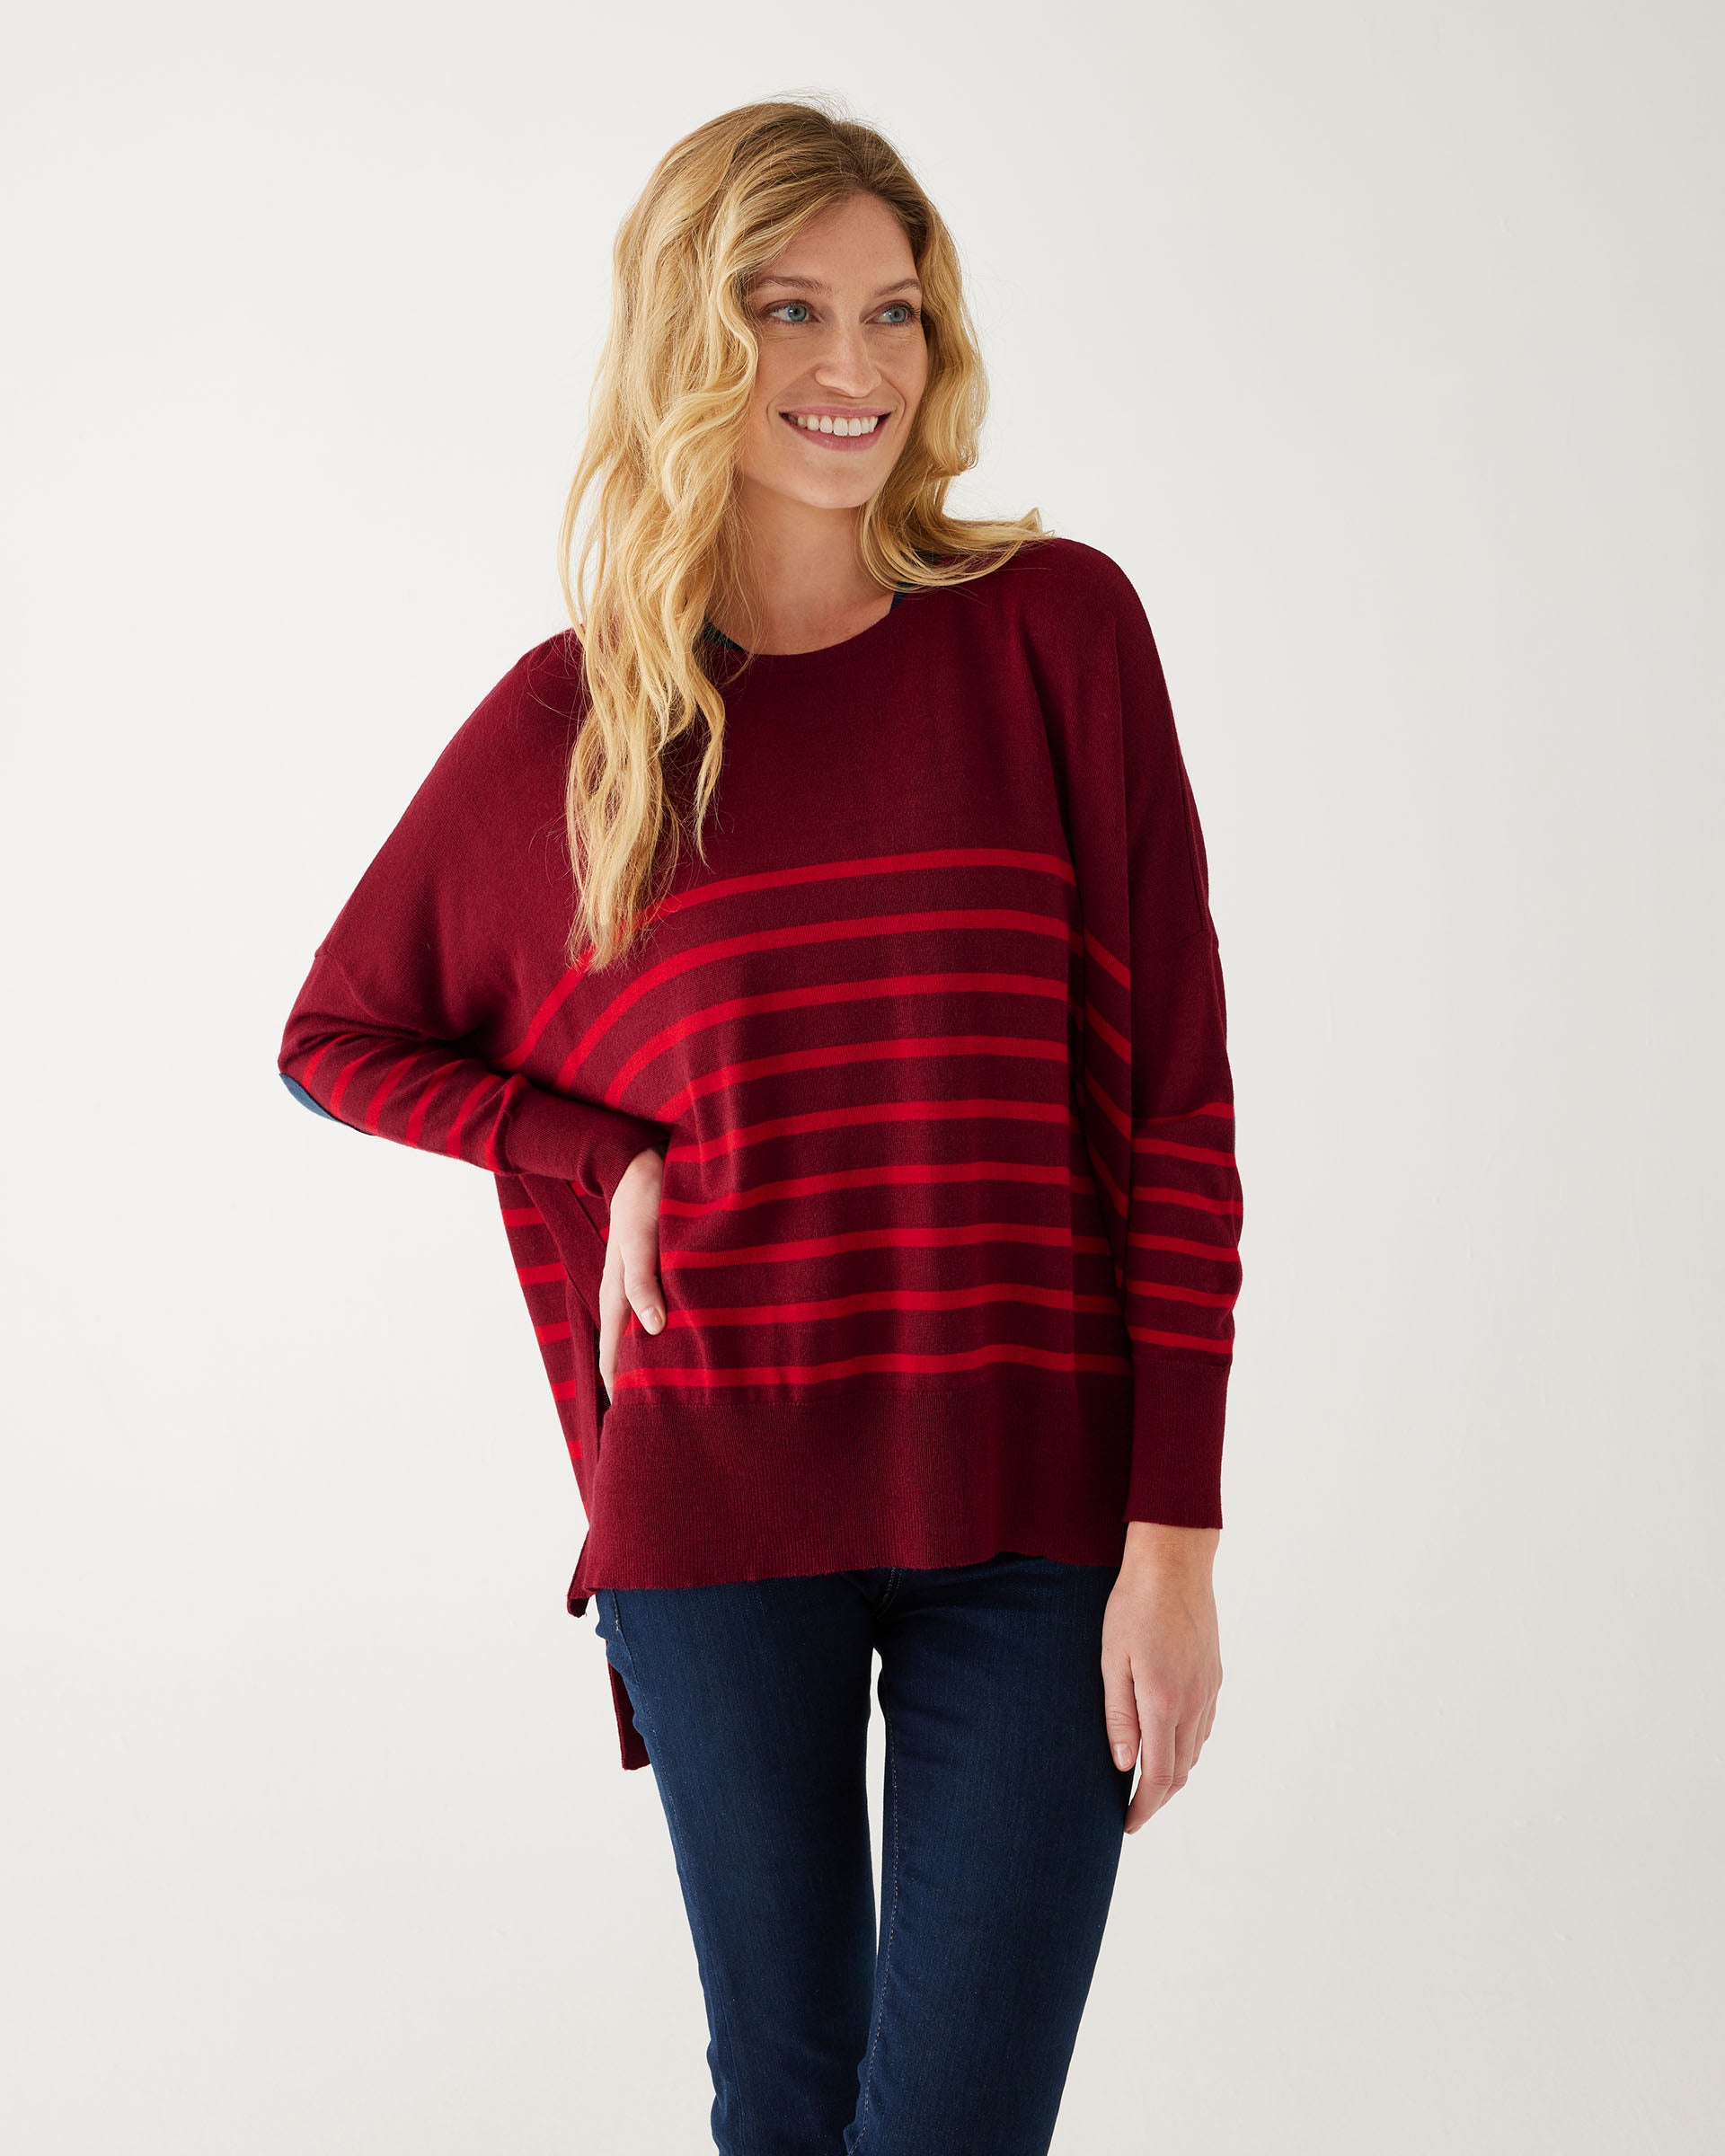 maroon sweater with red stripes and a navy heart elbow patch with dark jeans on white background